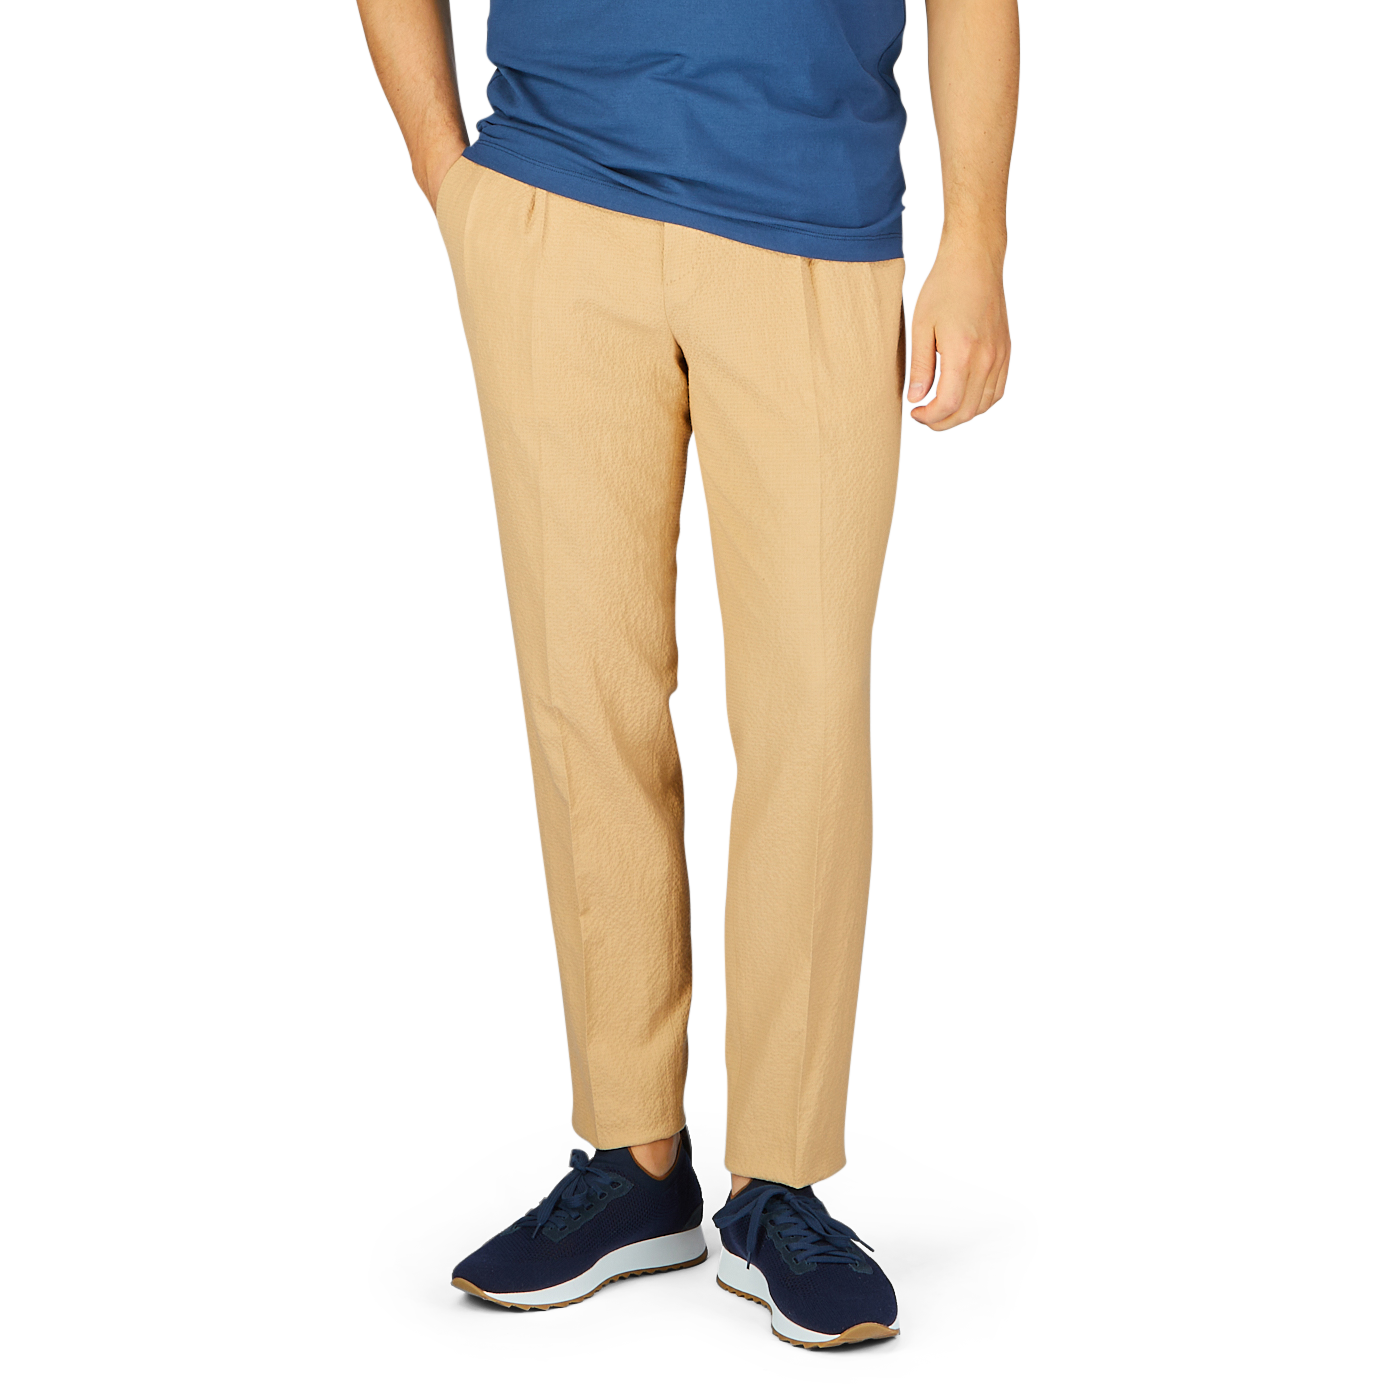 A person wearing a blue t-shirt, De Petrillo caramel cotton linen seersucker drawstring trousers, and blue sneakers, cropped at the waist.